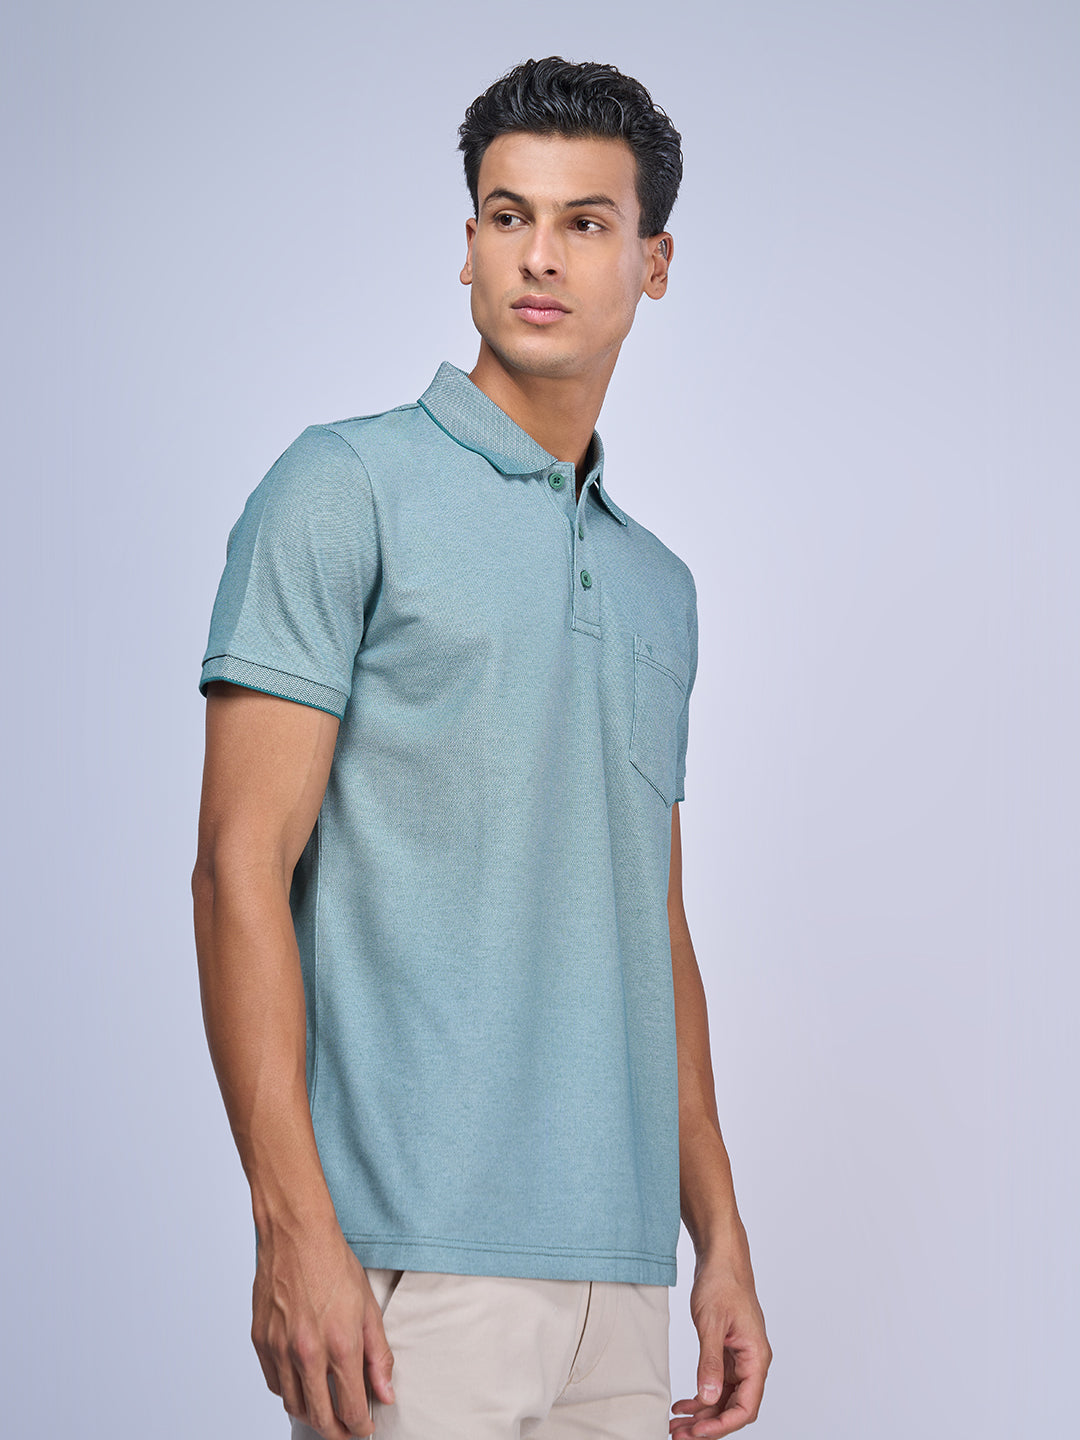 Mens Smart Fit Expert Polo Turq color Chest Pocket T shirt-EP25